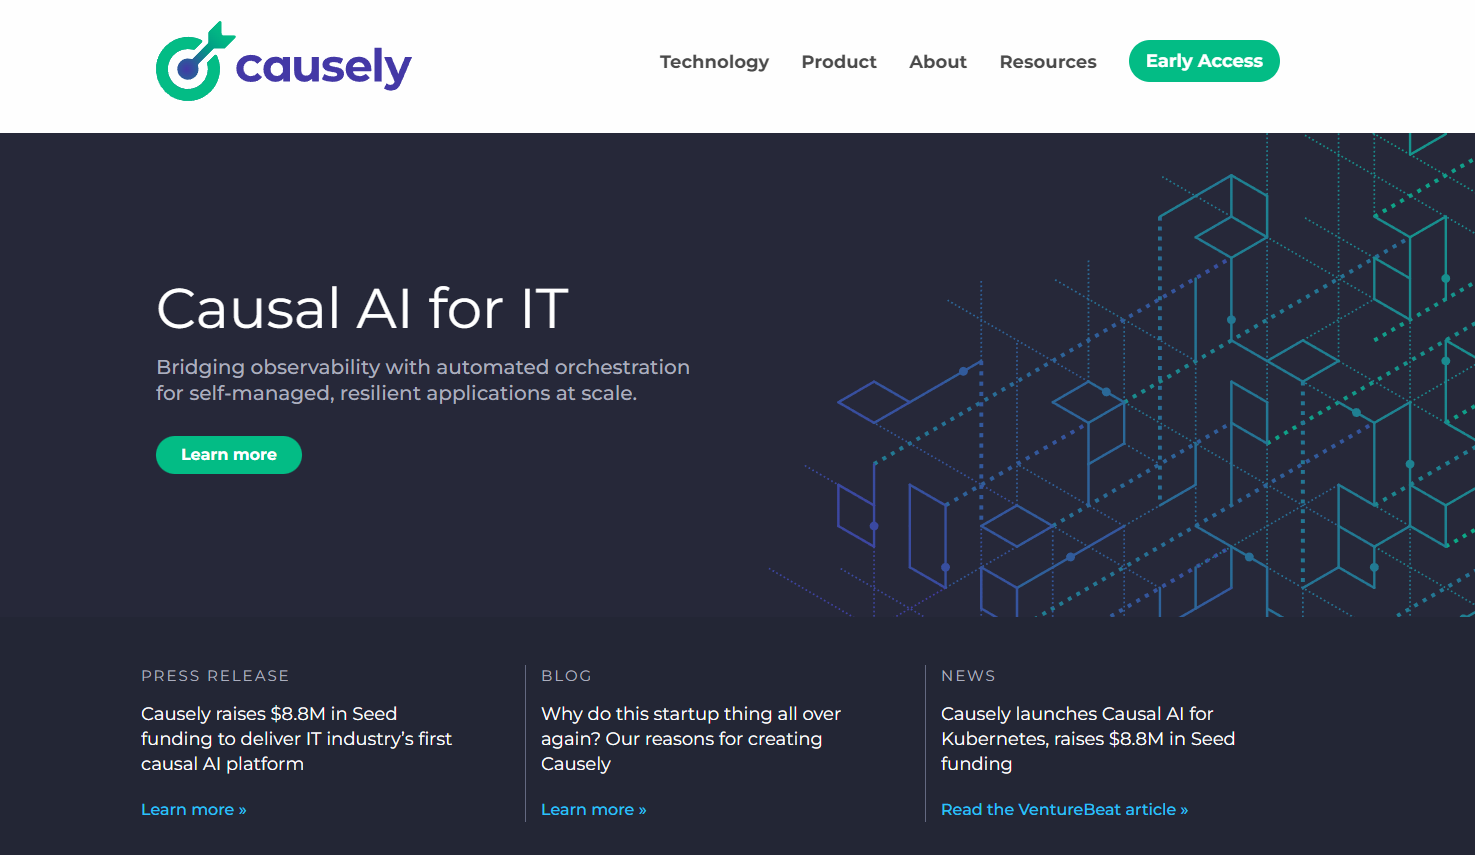 With $8.8M in seed funding, Causely is on a mission to revolutionize the IT industry.